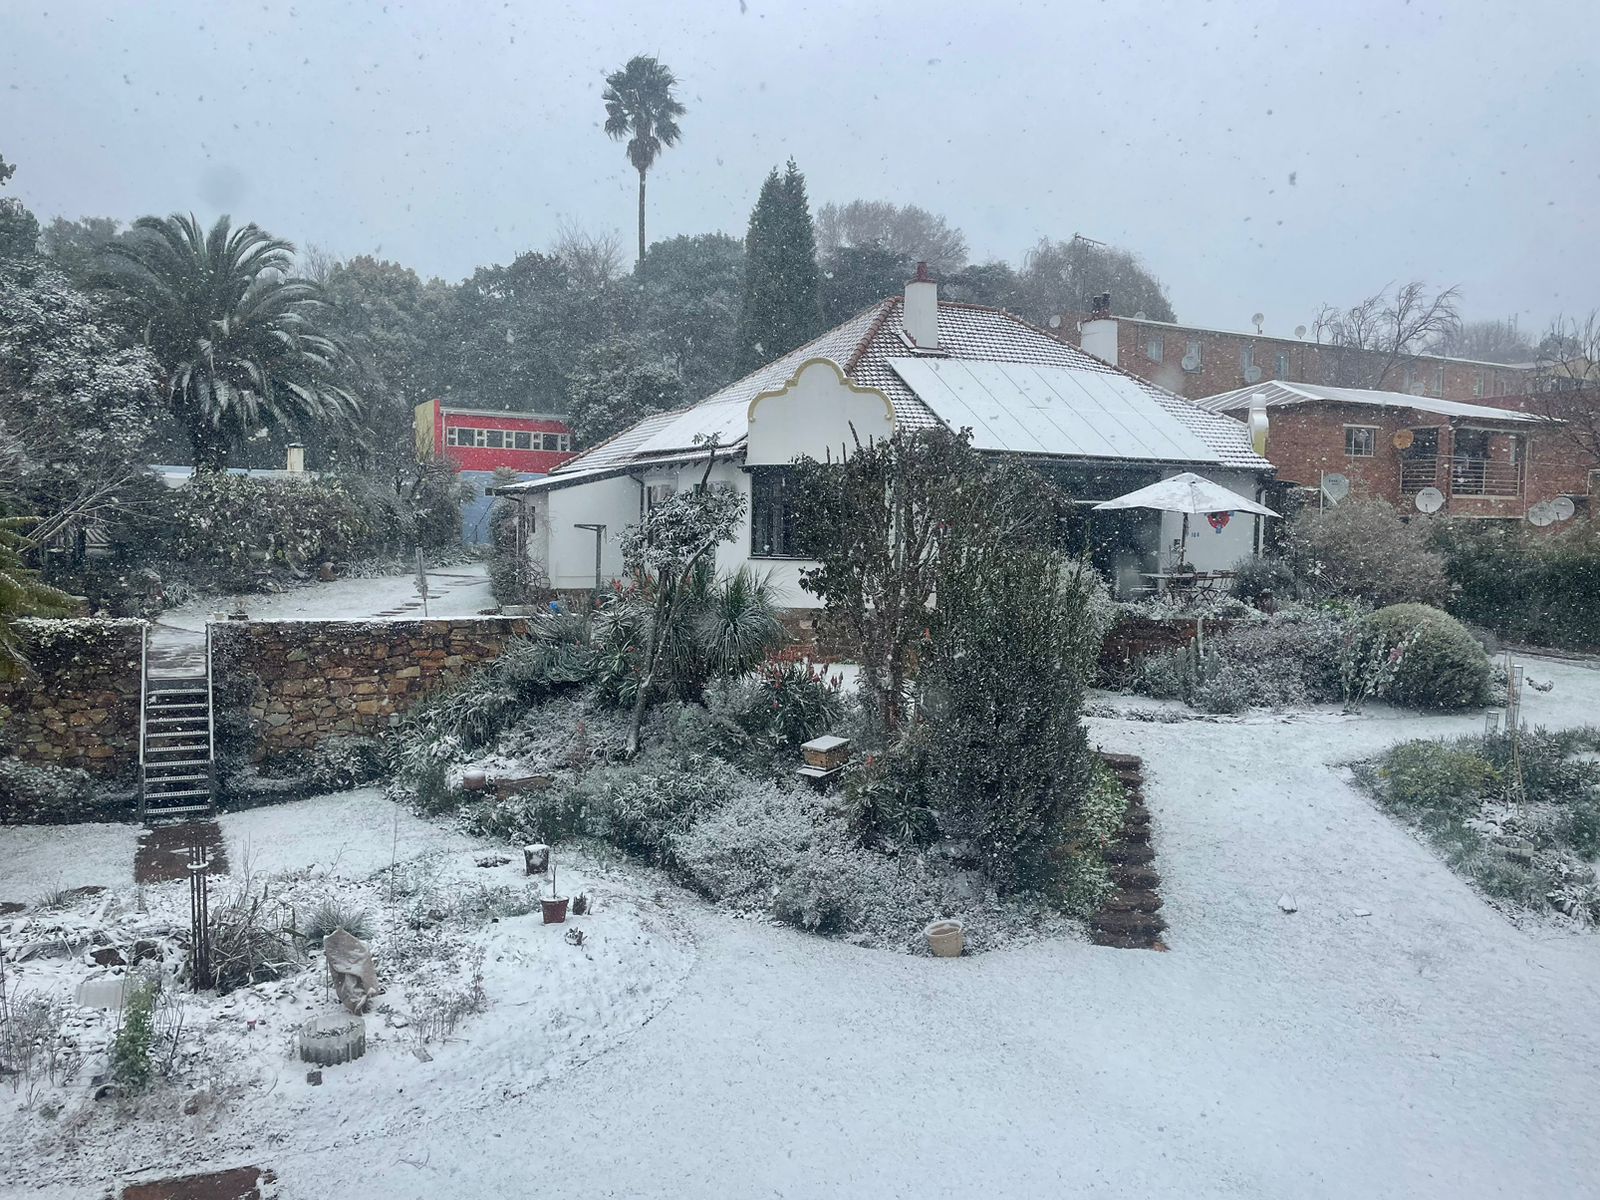 Snow in Jozi, no global warming here